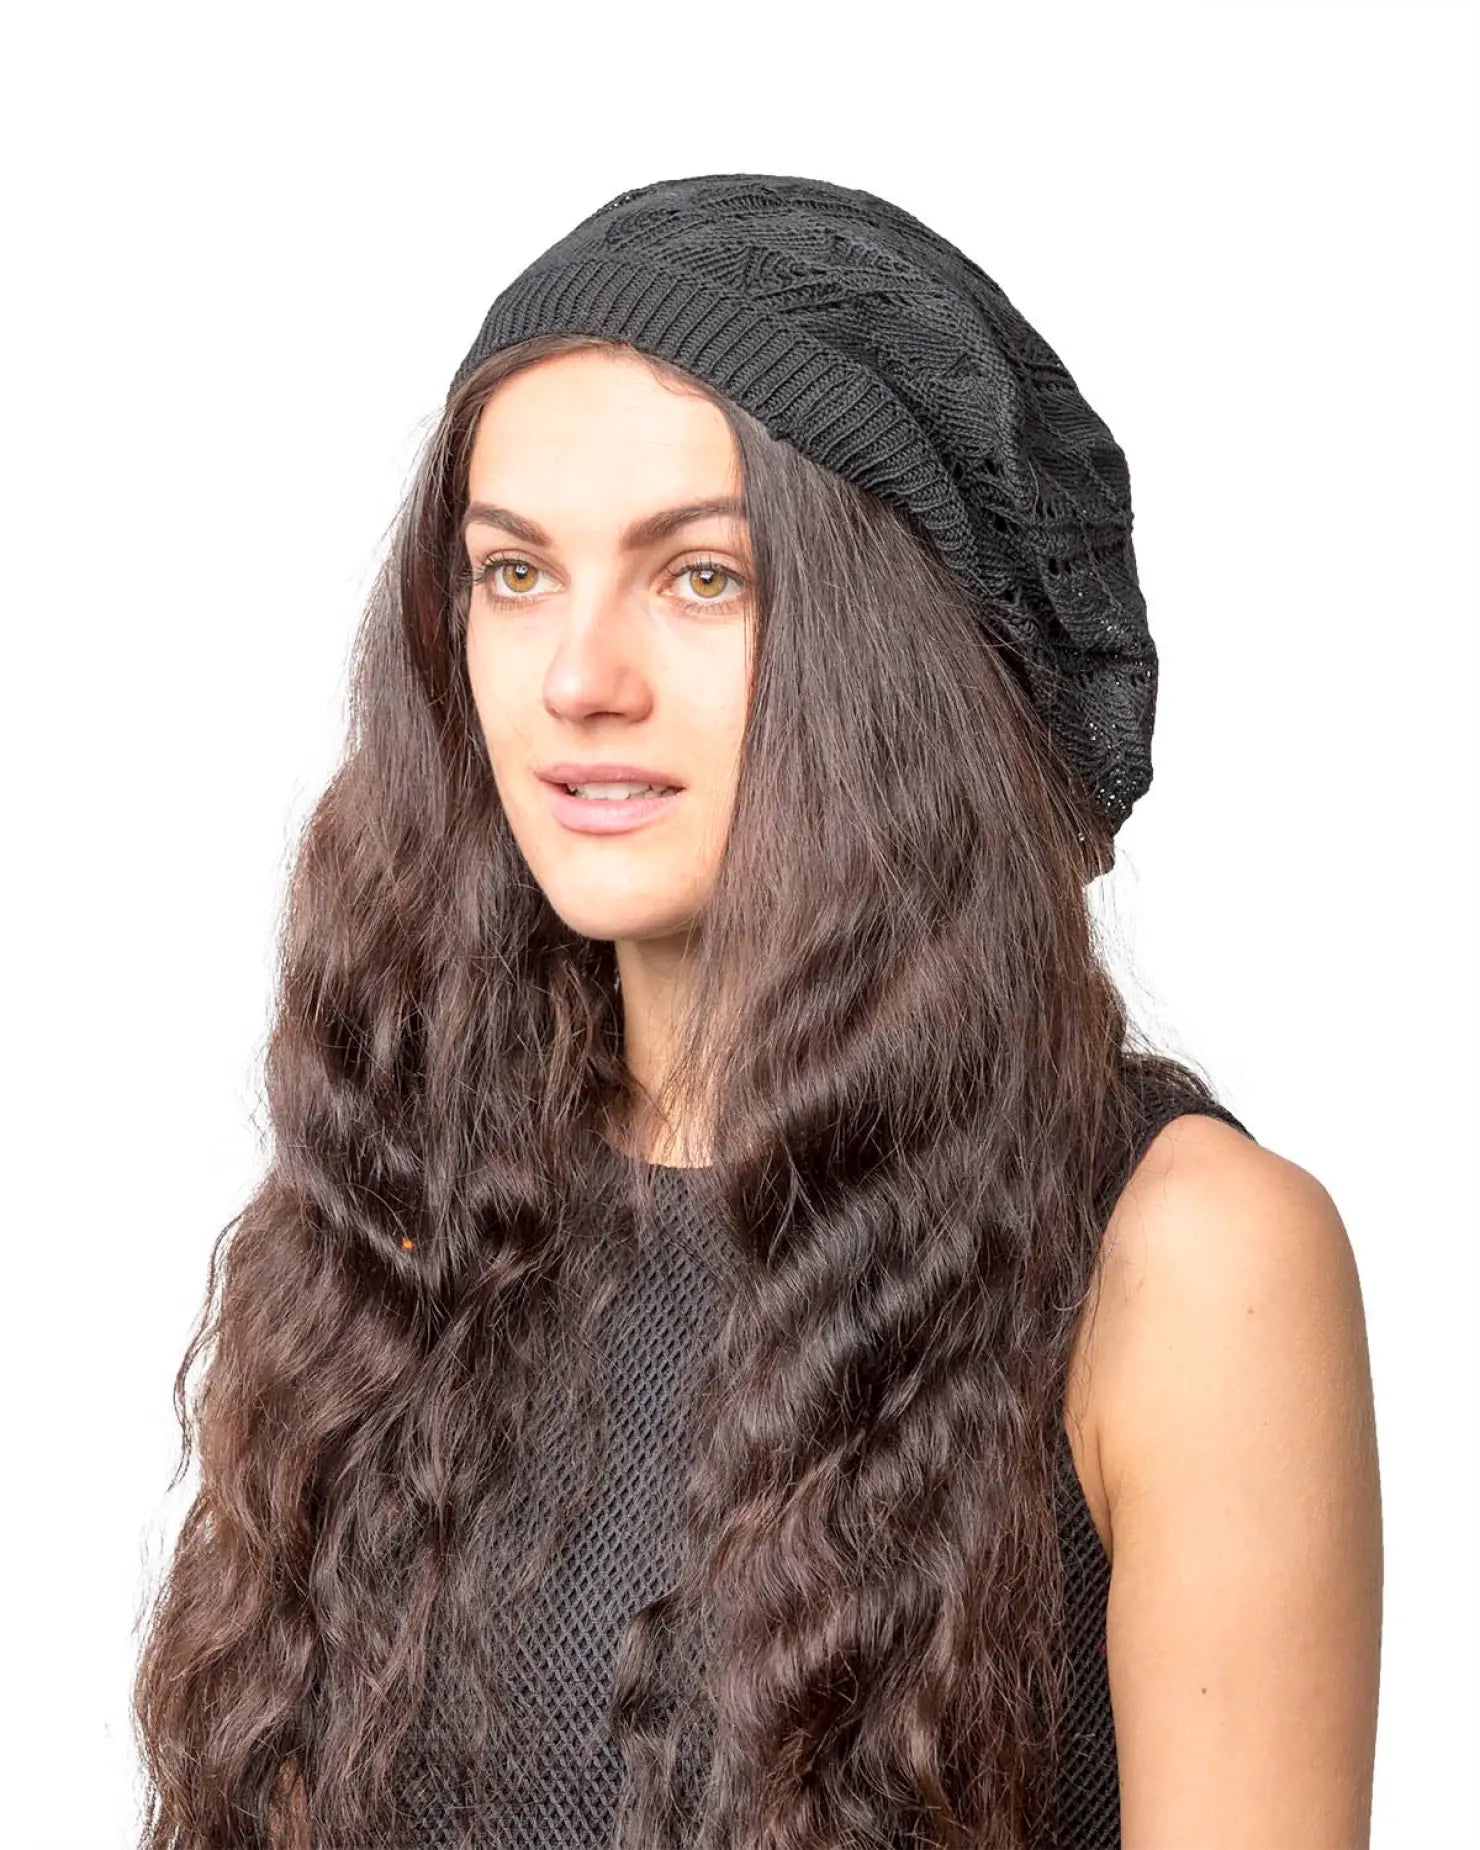 Woman in black hat with long brown hair modeling Women’s Triangle Design Knitted Crochet Beanie Hat